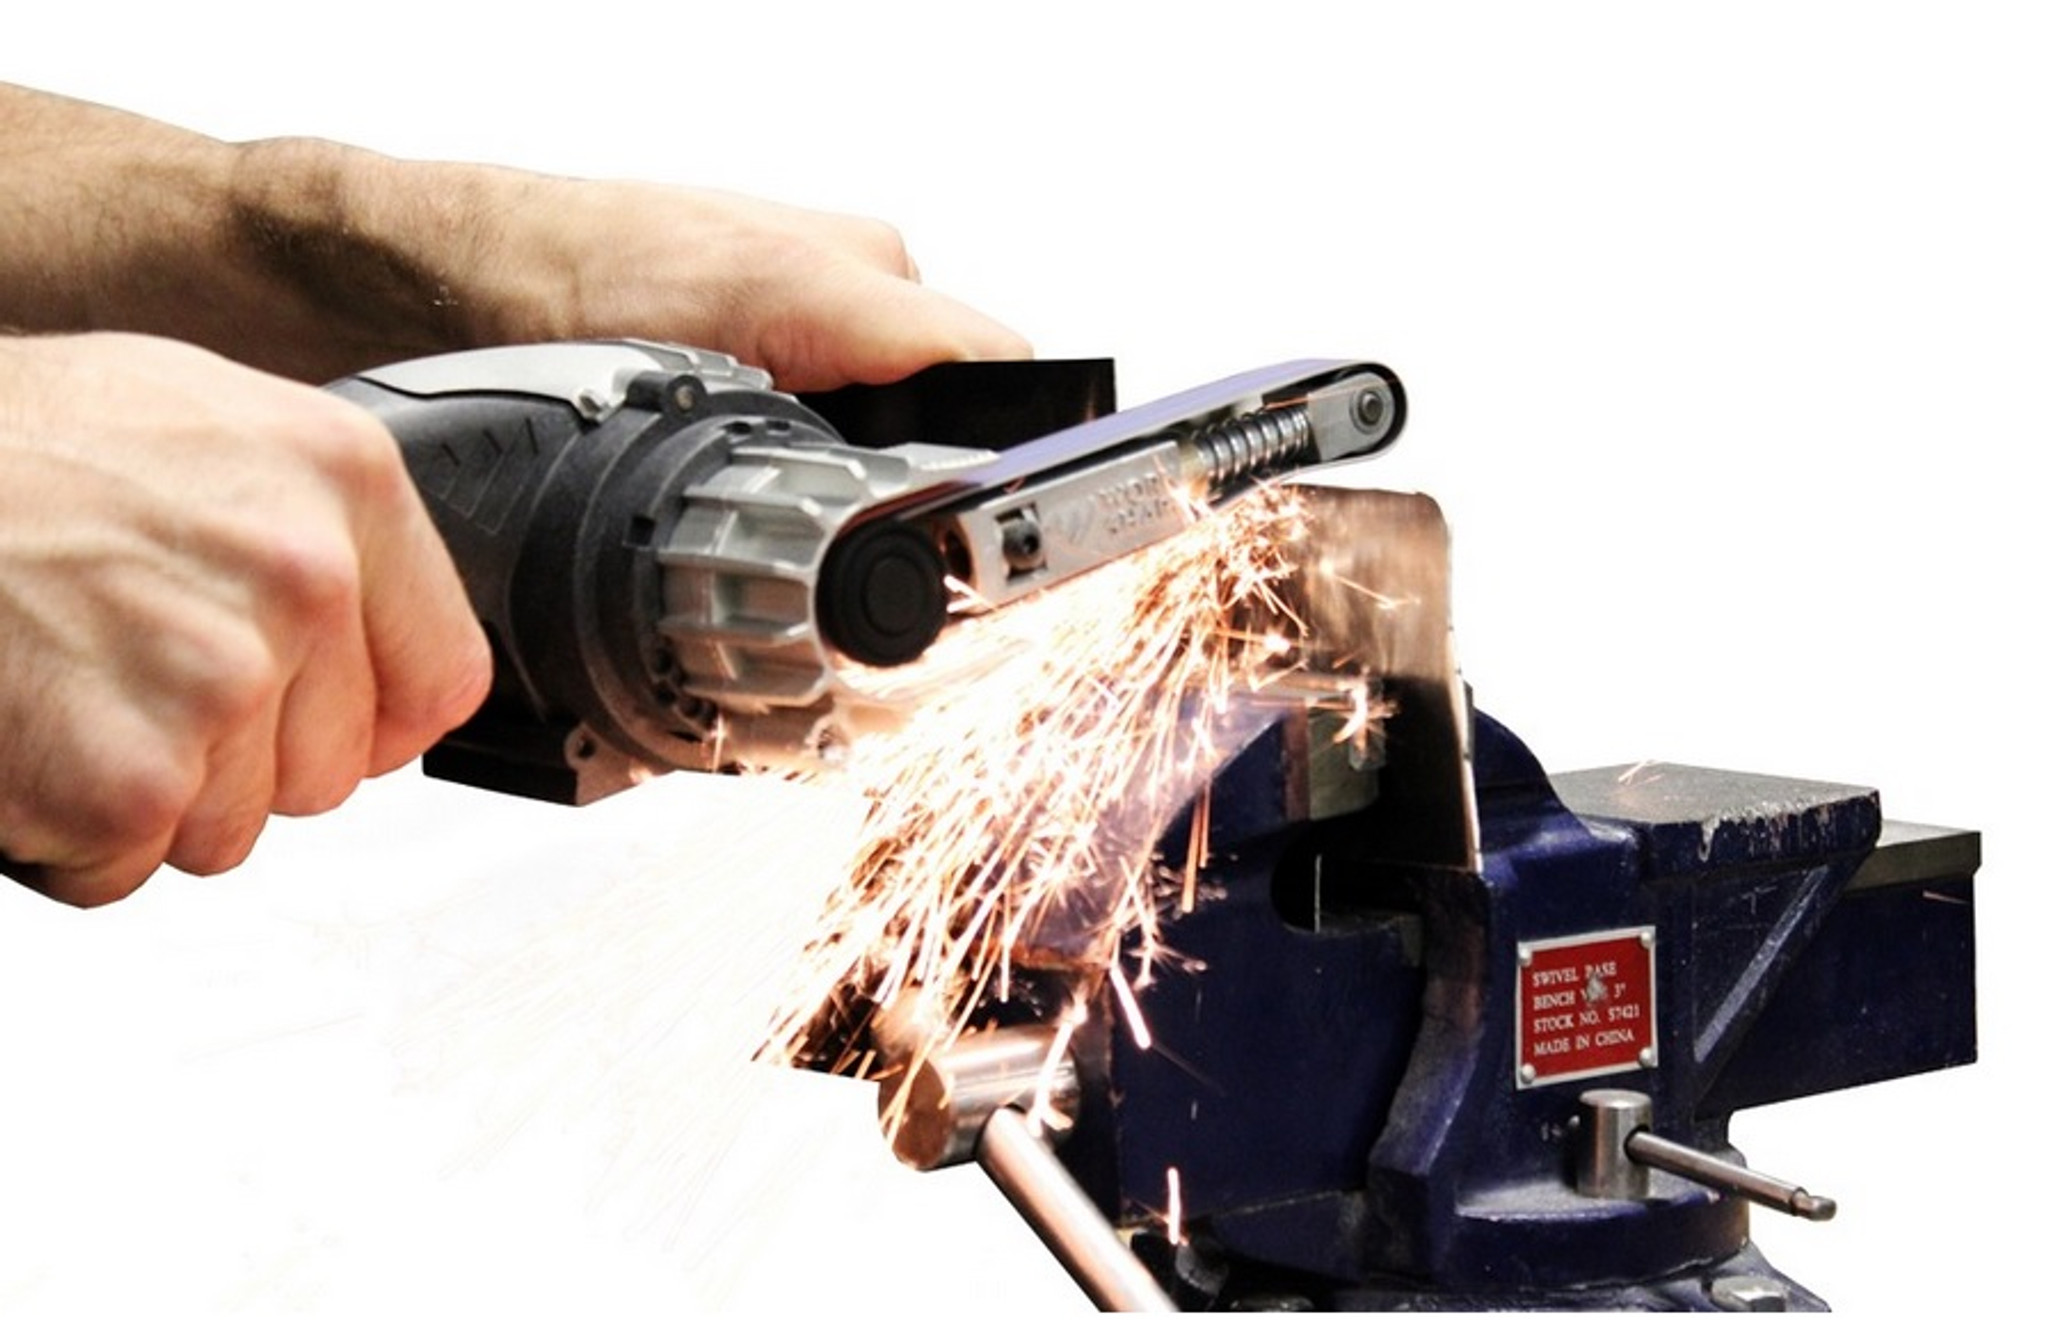 Attachment Angle Grinder, Woodworking Tools, Knife Sharpener